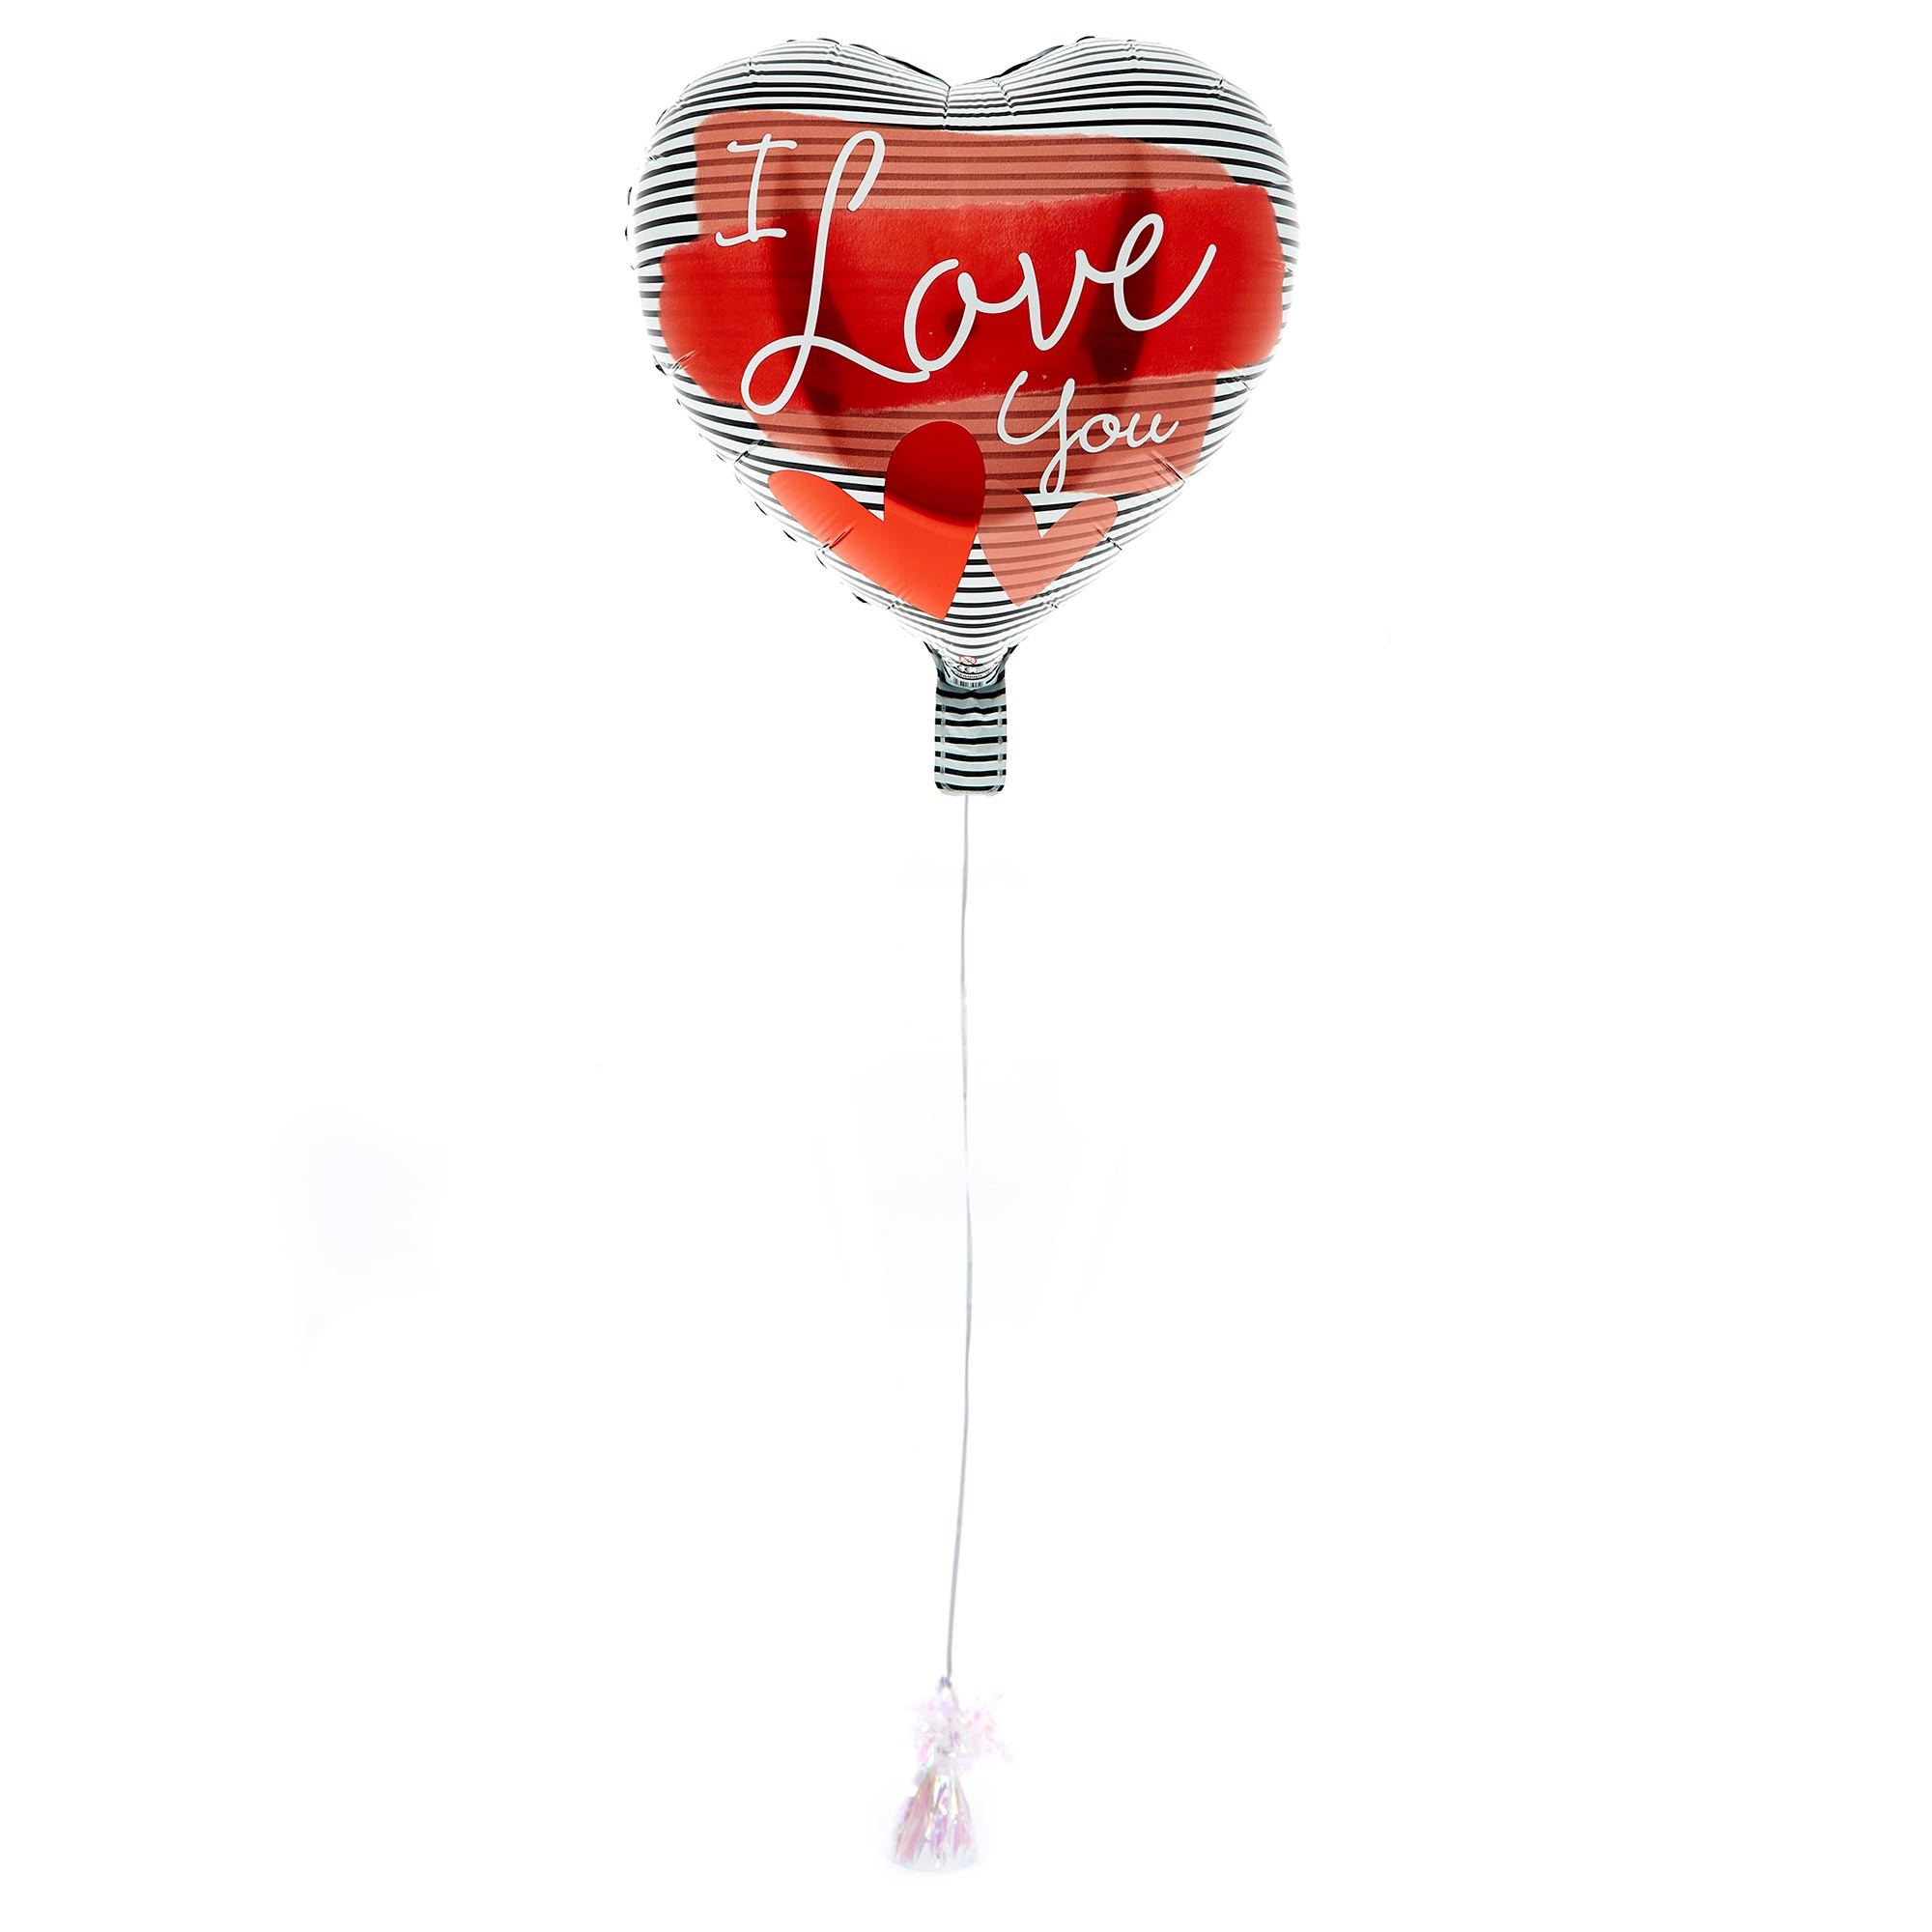 I Love You Heart Balloon & Lindt Chocolate Box - FREE GIFT CARD!